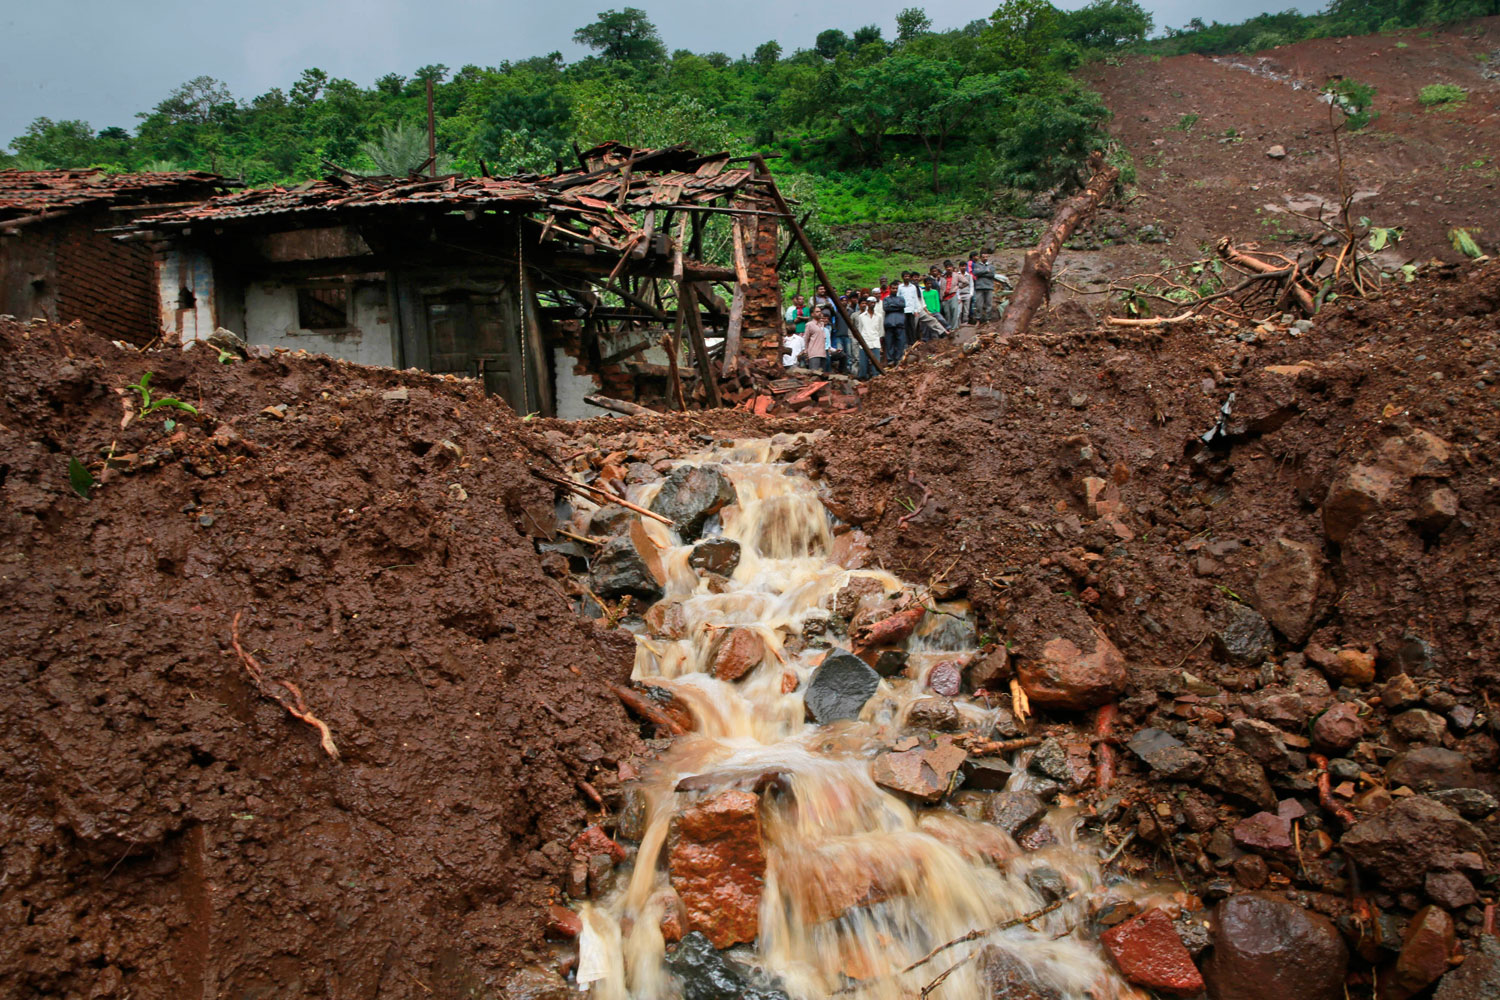 Villagers watch a rescue operation standing by mud and slush at the site of a landslide in Malin village, in the western Indian state of Maharashtra on Aug. 1, 2014.